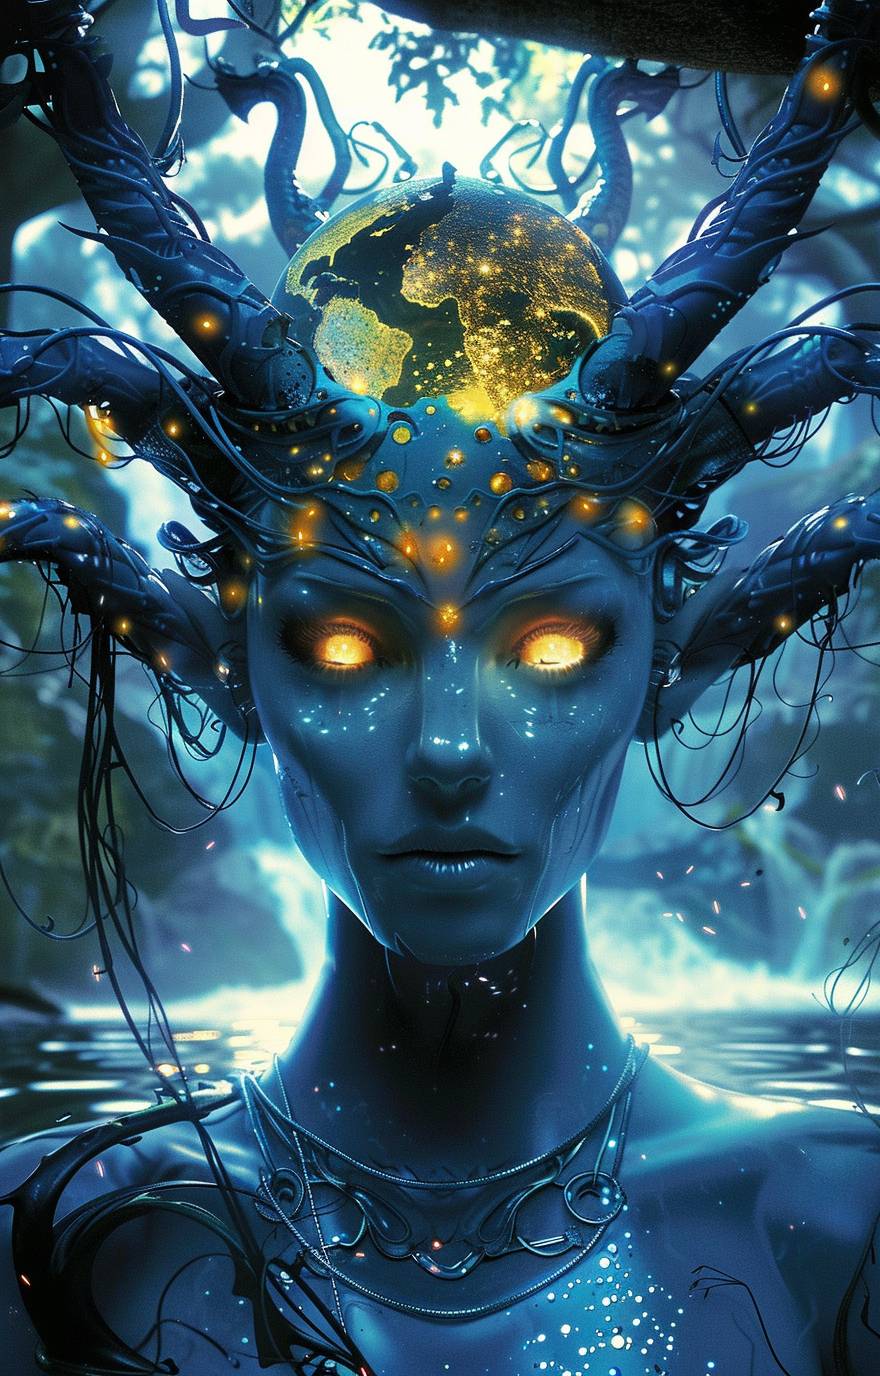 A beautiful blue woman with an elegant, slender figure and glowing eyes stands in front of the Earth. She has many metallic vines growing from behind her ears to form two metal horns that stand upright above each ear. The background is a dark night sky with trees and stars. Her chest skin glows a golden yellow like fire under sunlight. Water flows around her, creating ripples. She wears ancient silver jewelry and carries futuristic LED lights in a cinematic style.